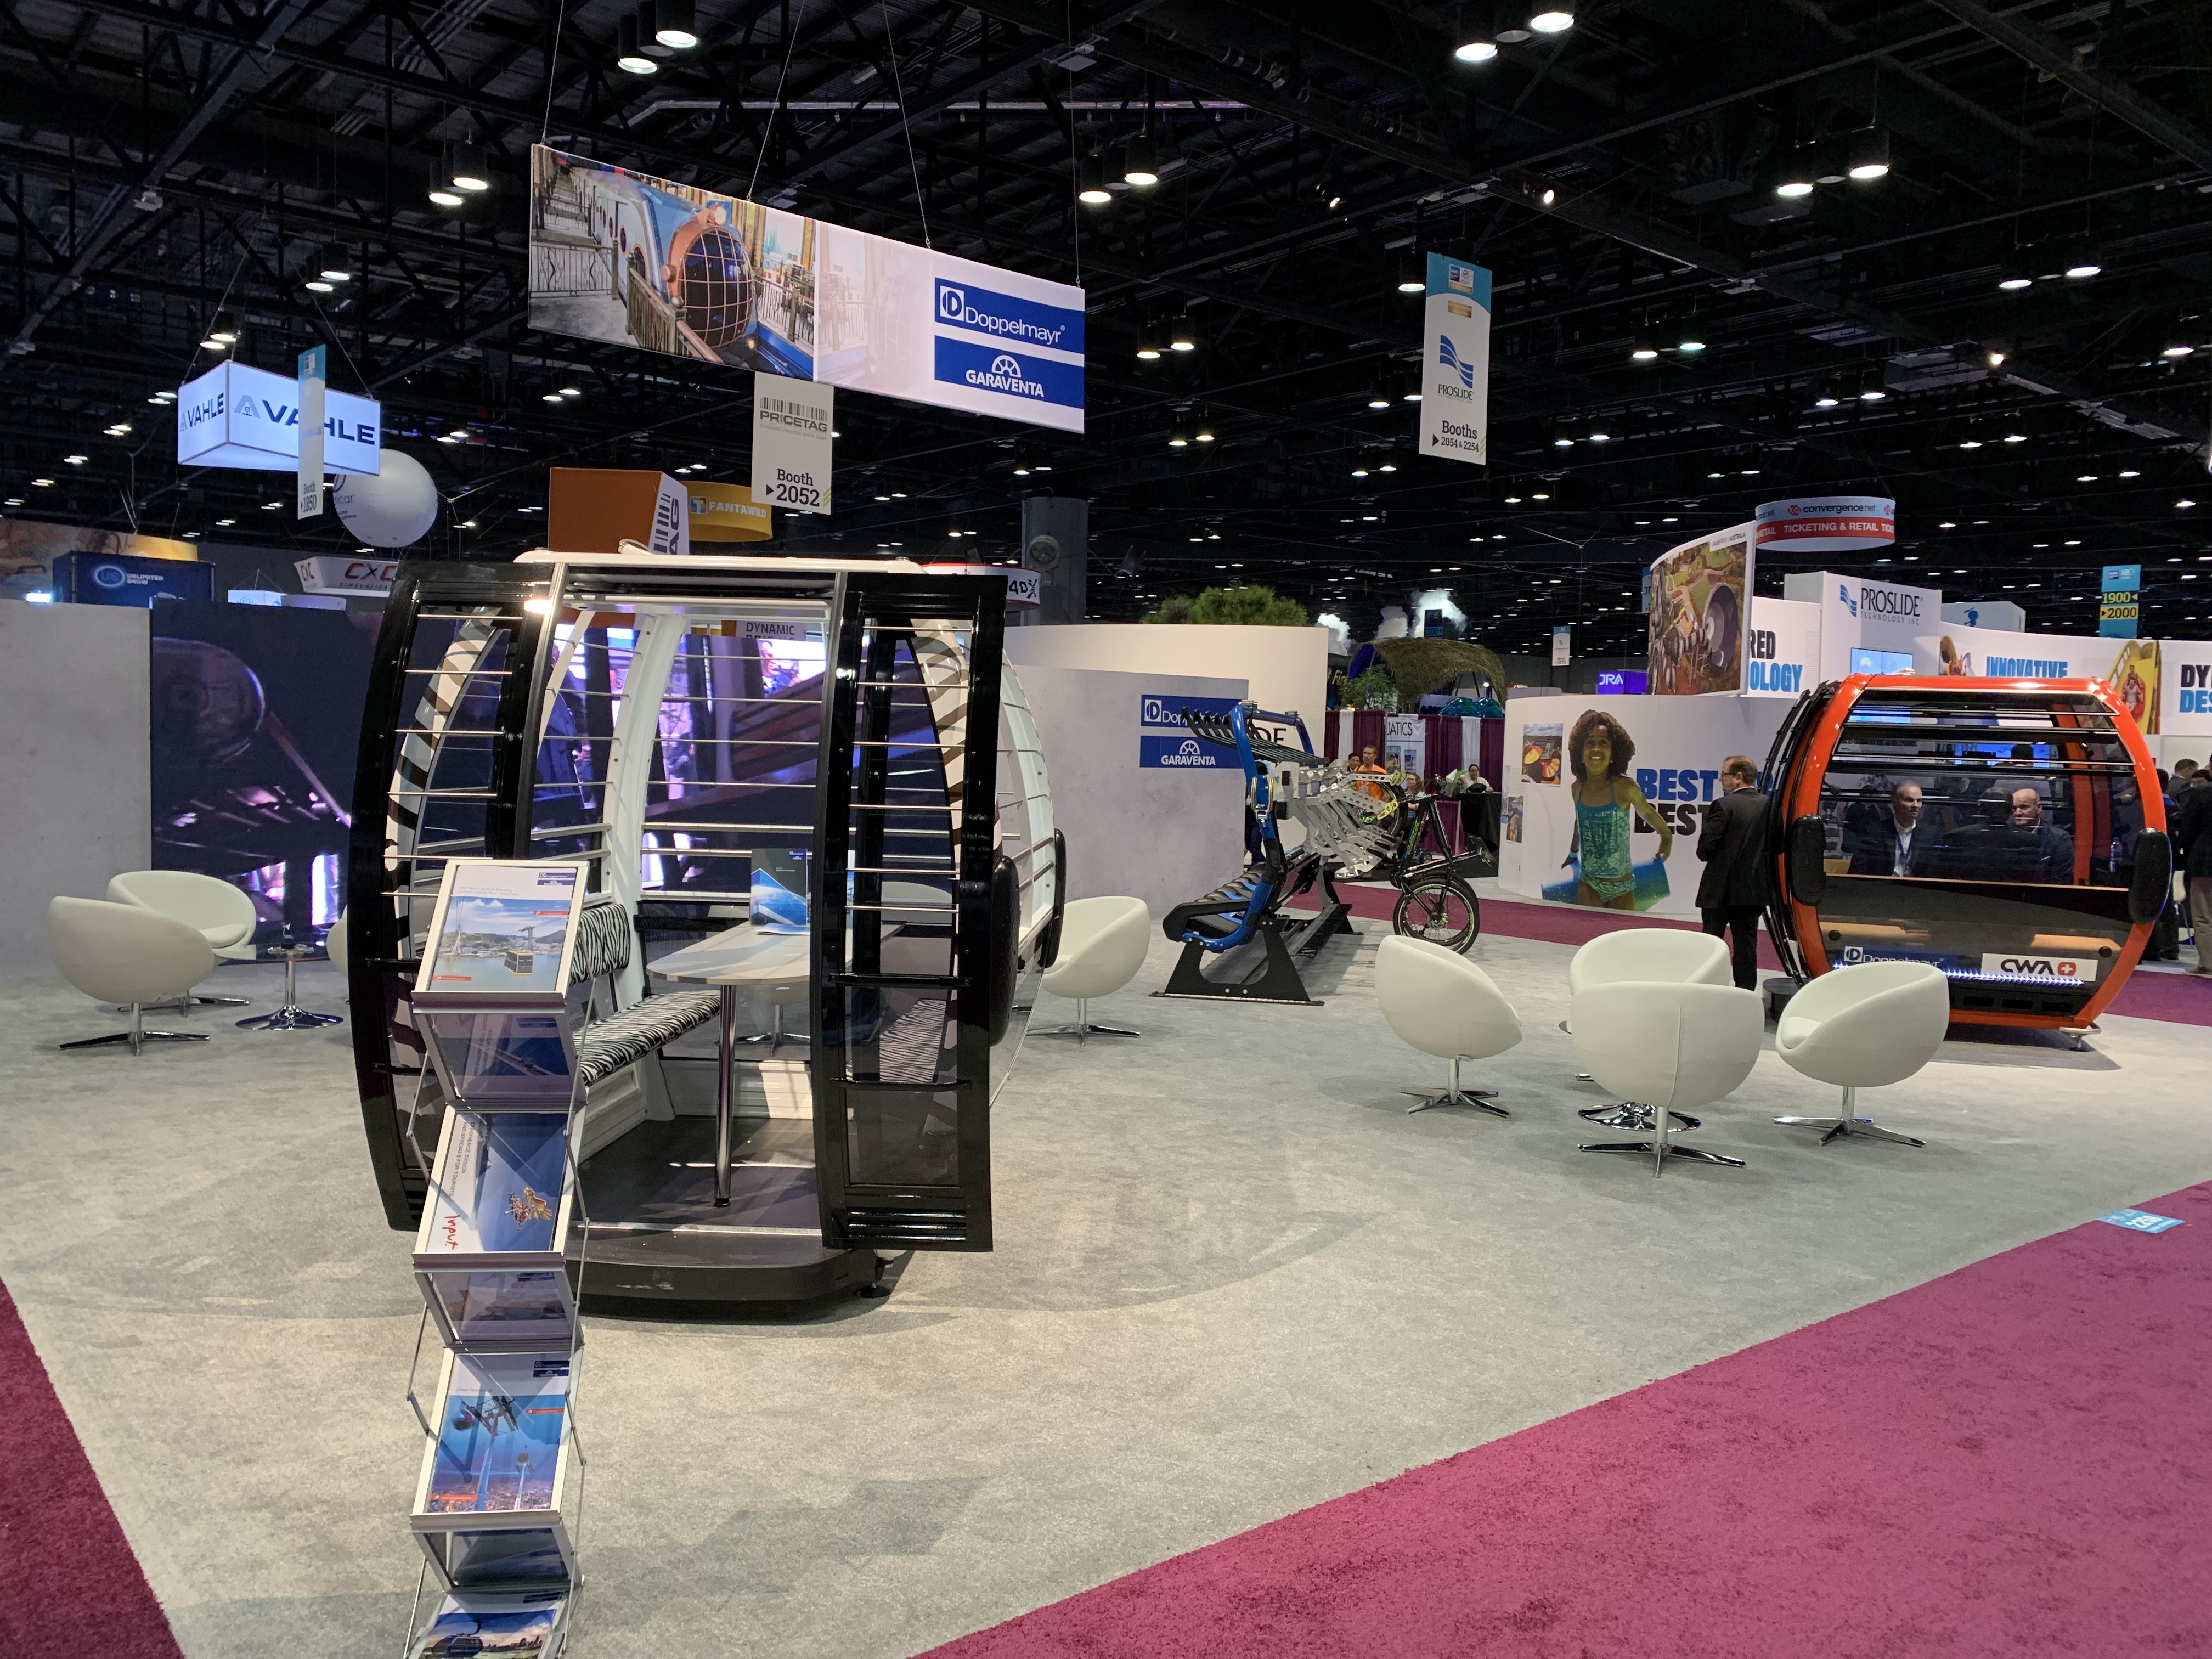 Doppelmayr at the Leading Attraction Expo IAAPA